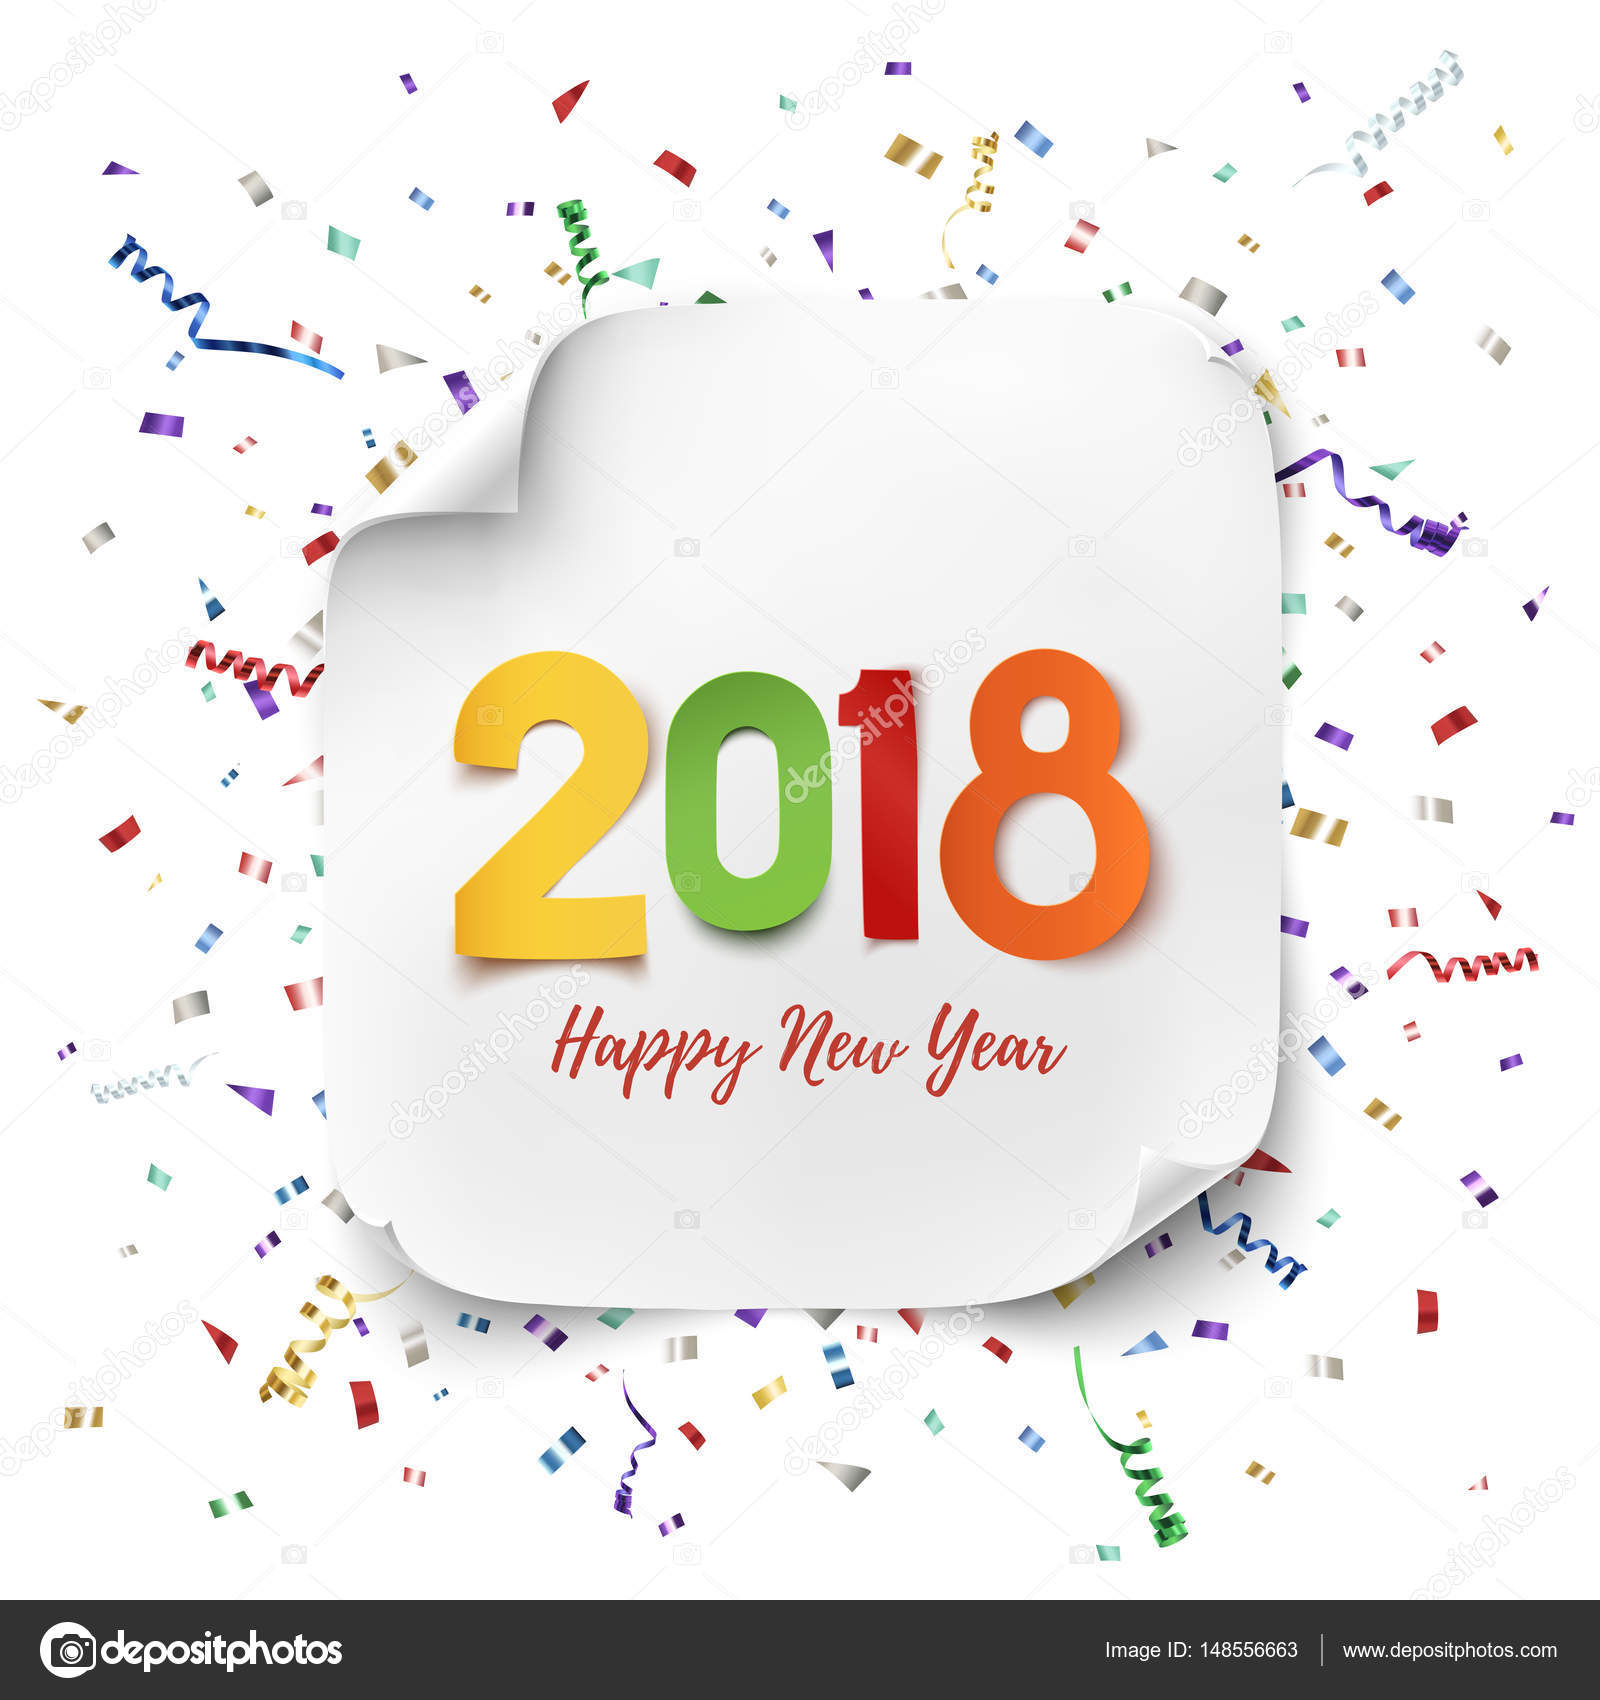 BONJOUR A TOUS - Page 39 Depositphotos_148556663-stock-illustration-happy-new-year-2018-greeting